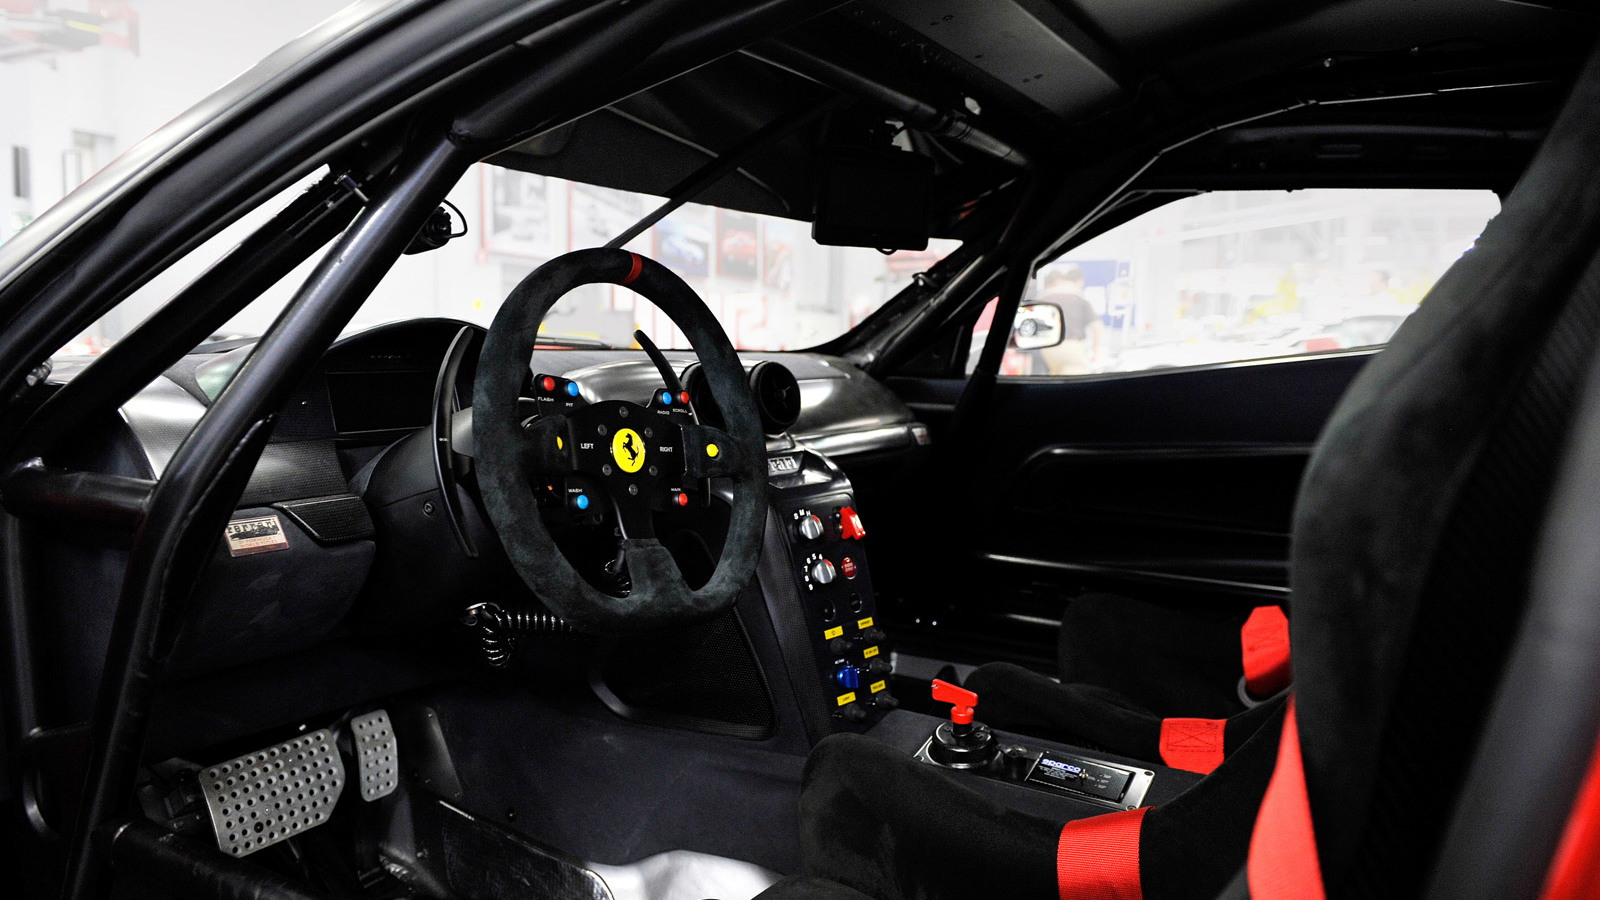 Ferrari 599XX Evo to be auctioned off for Italy's earthquake victims of 2012